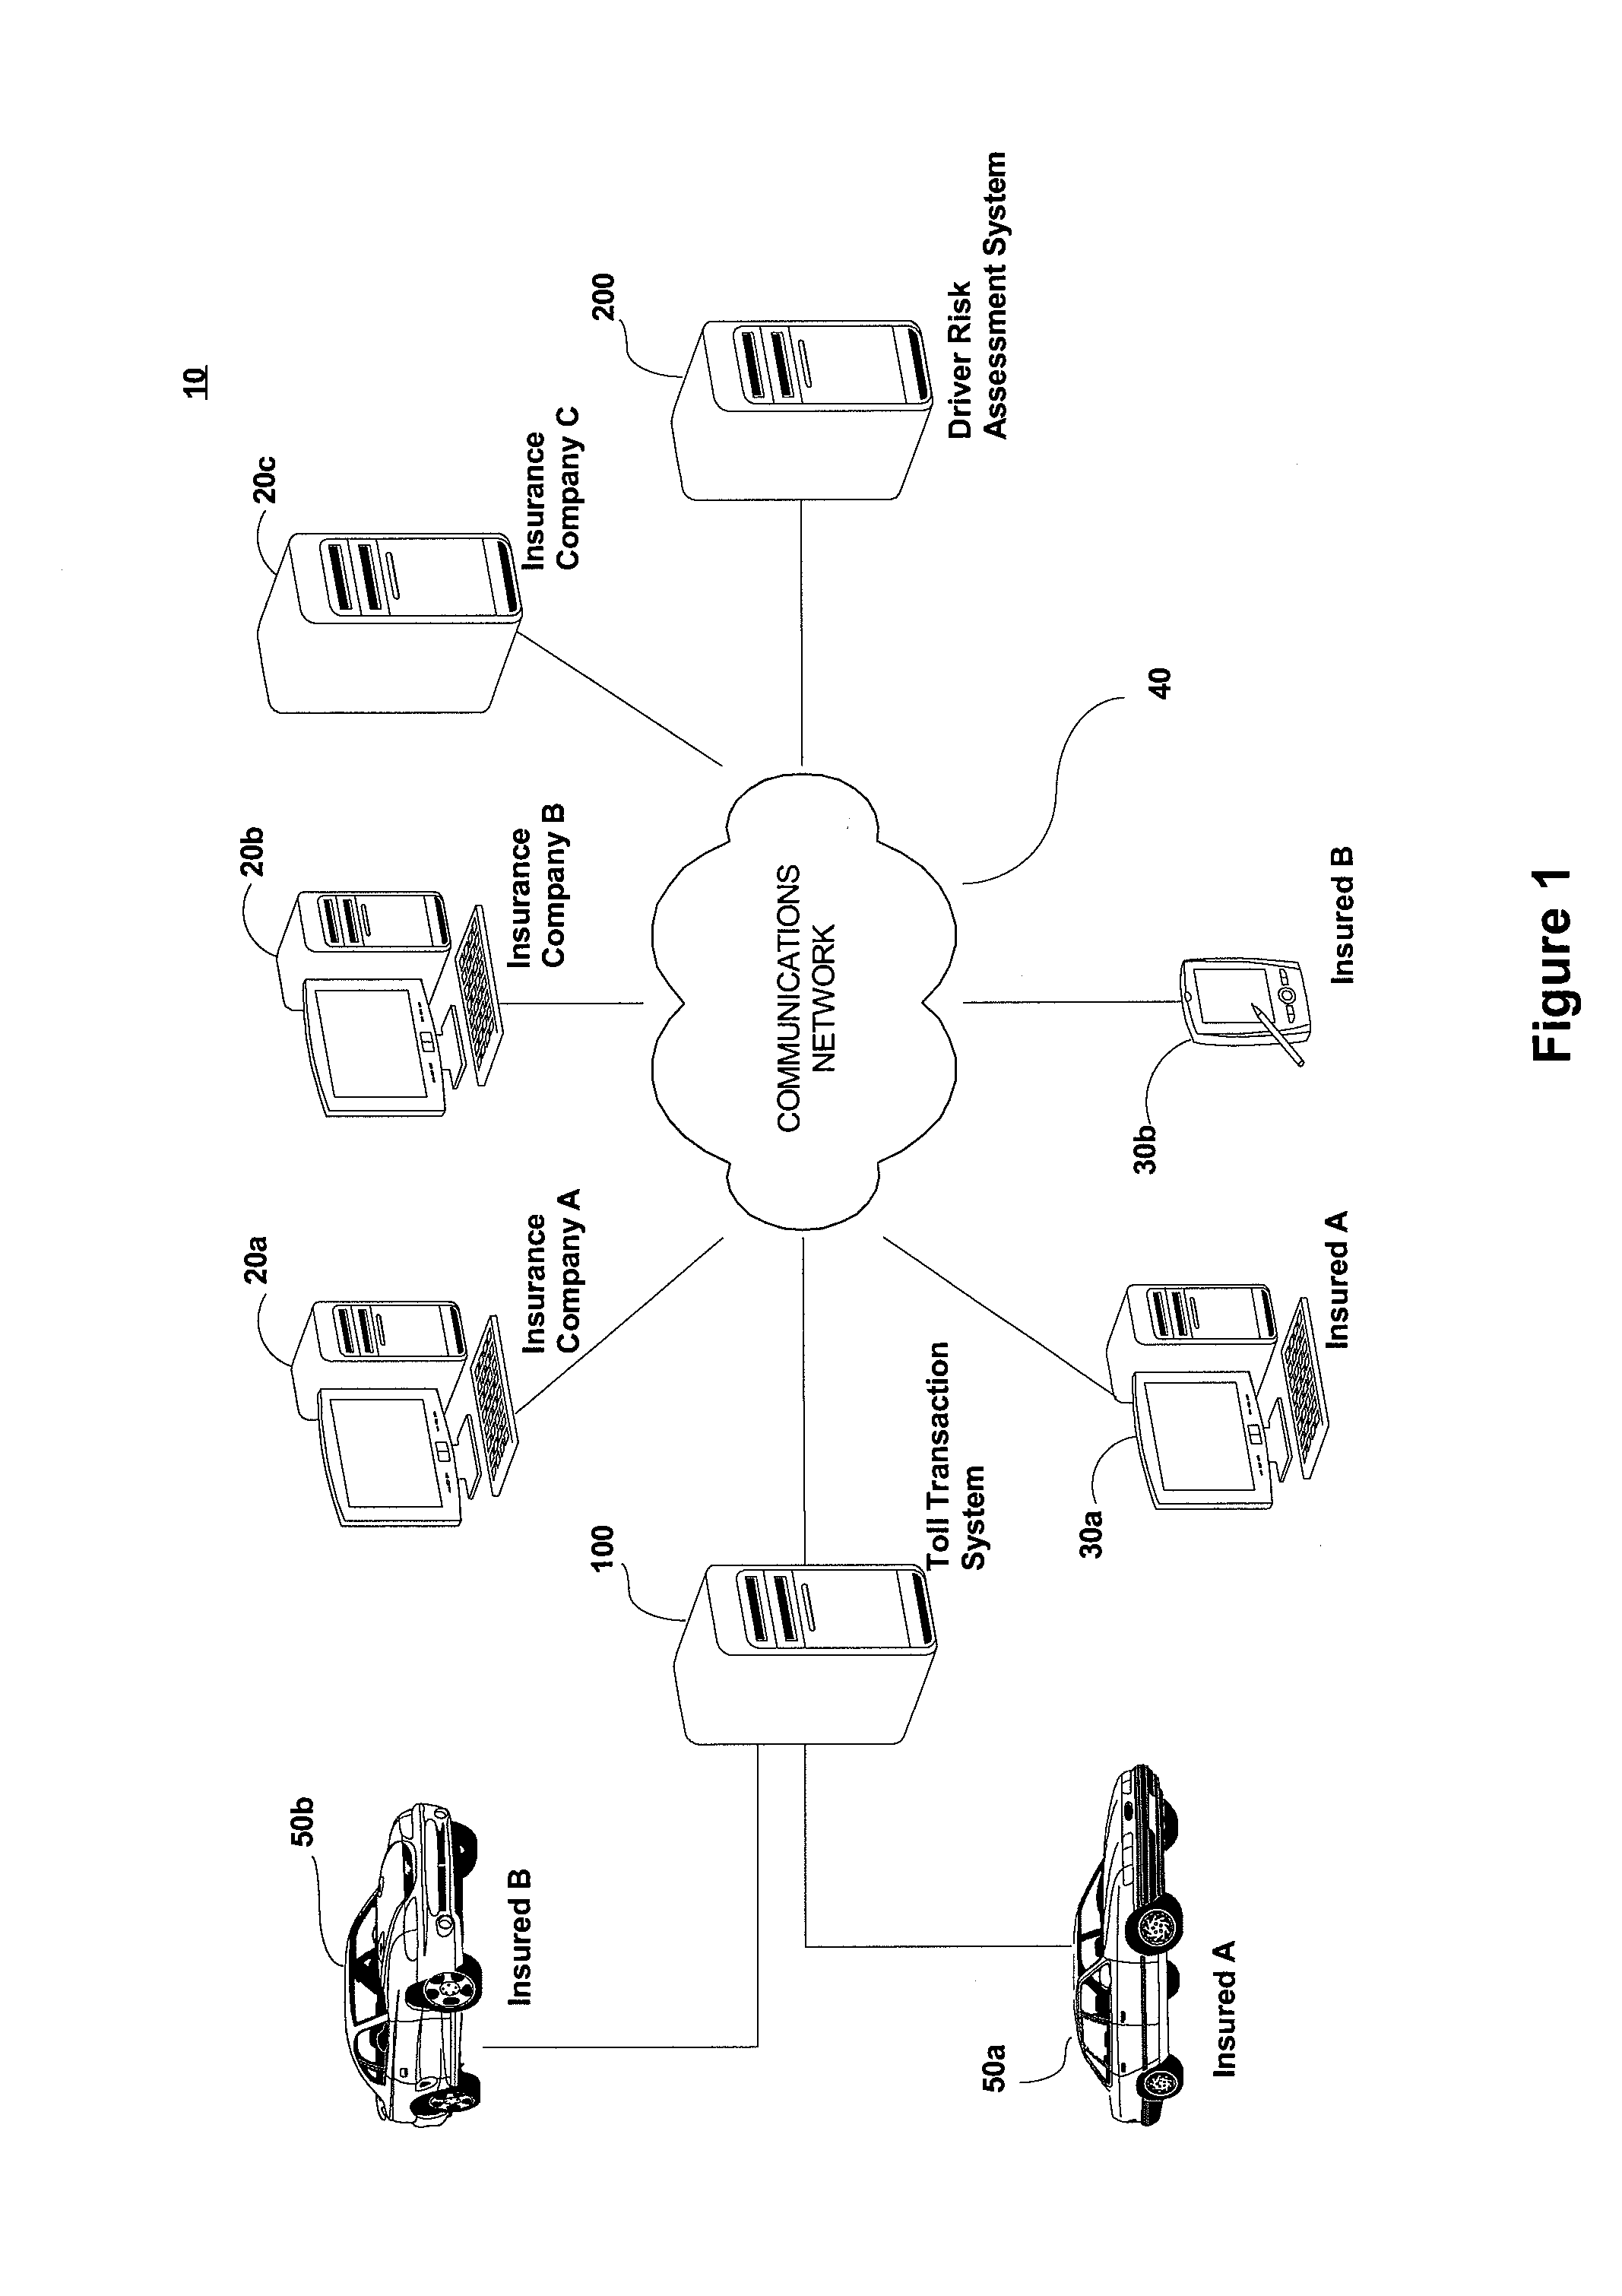 System and method for developing a driver safety rating